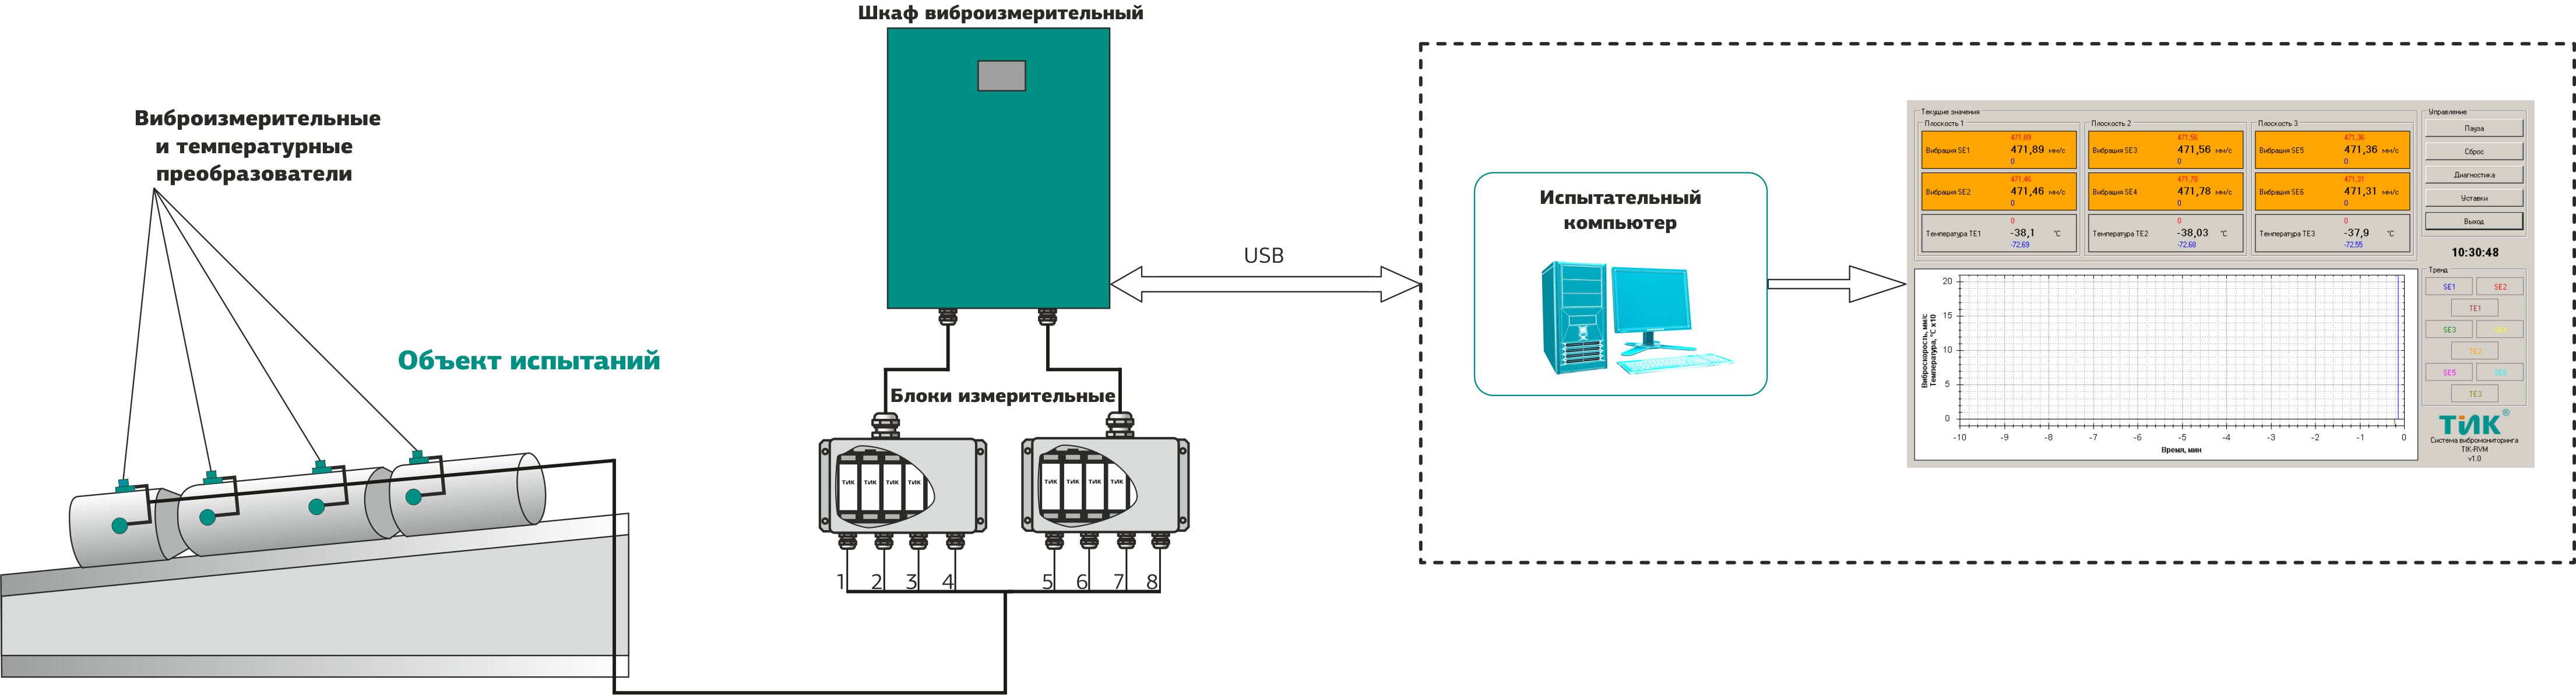 APPLICATION DIAGRAM OF TIK-RVM SYSTEM FOR CONDITION CRITICAL UNITS MONITORING